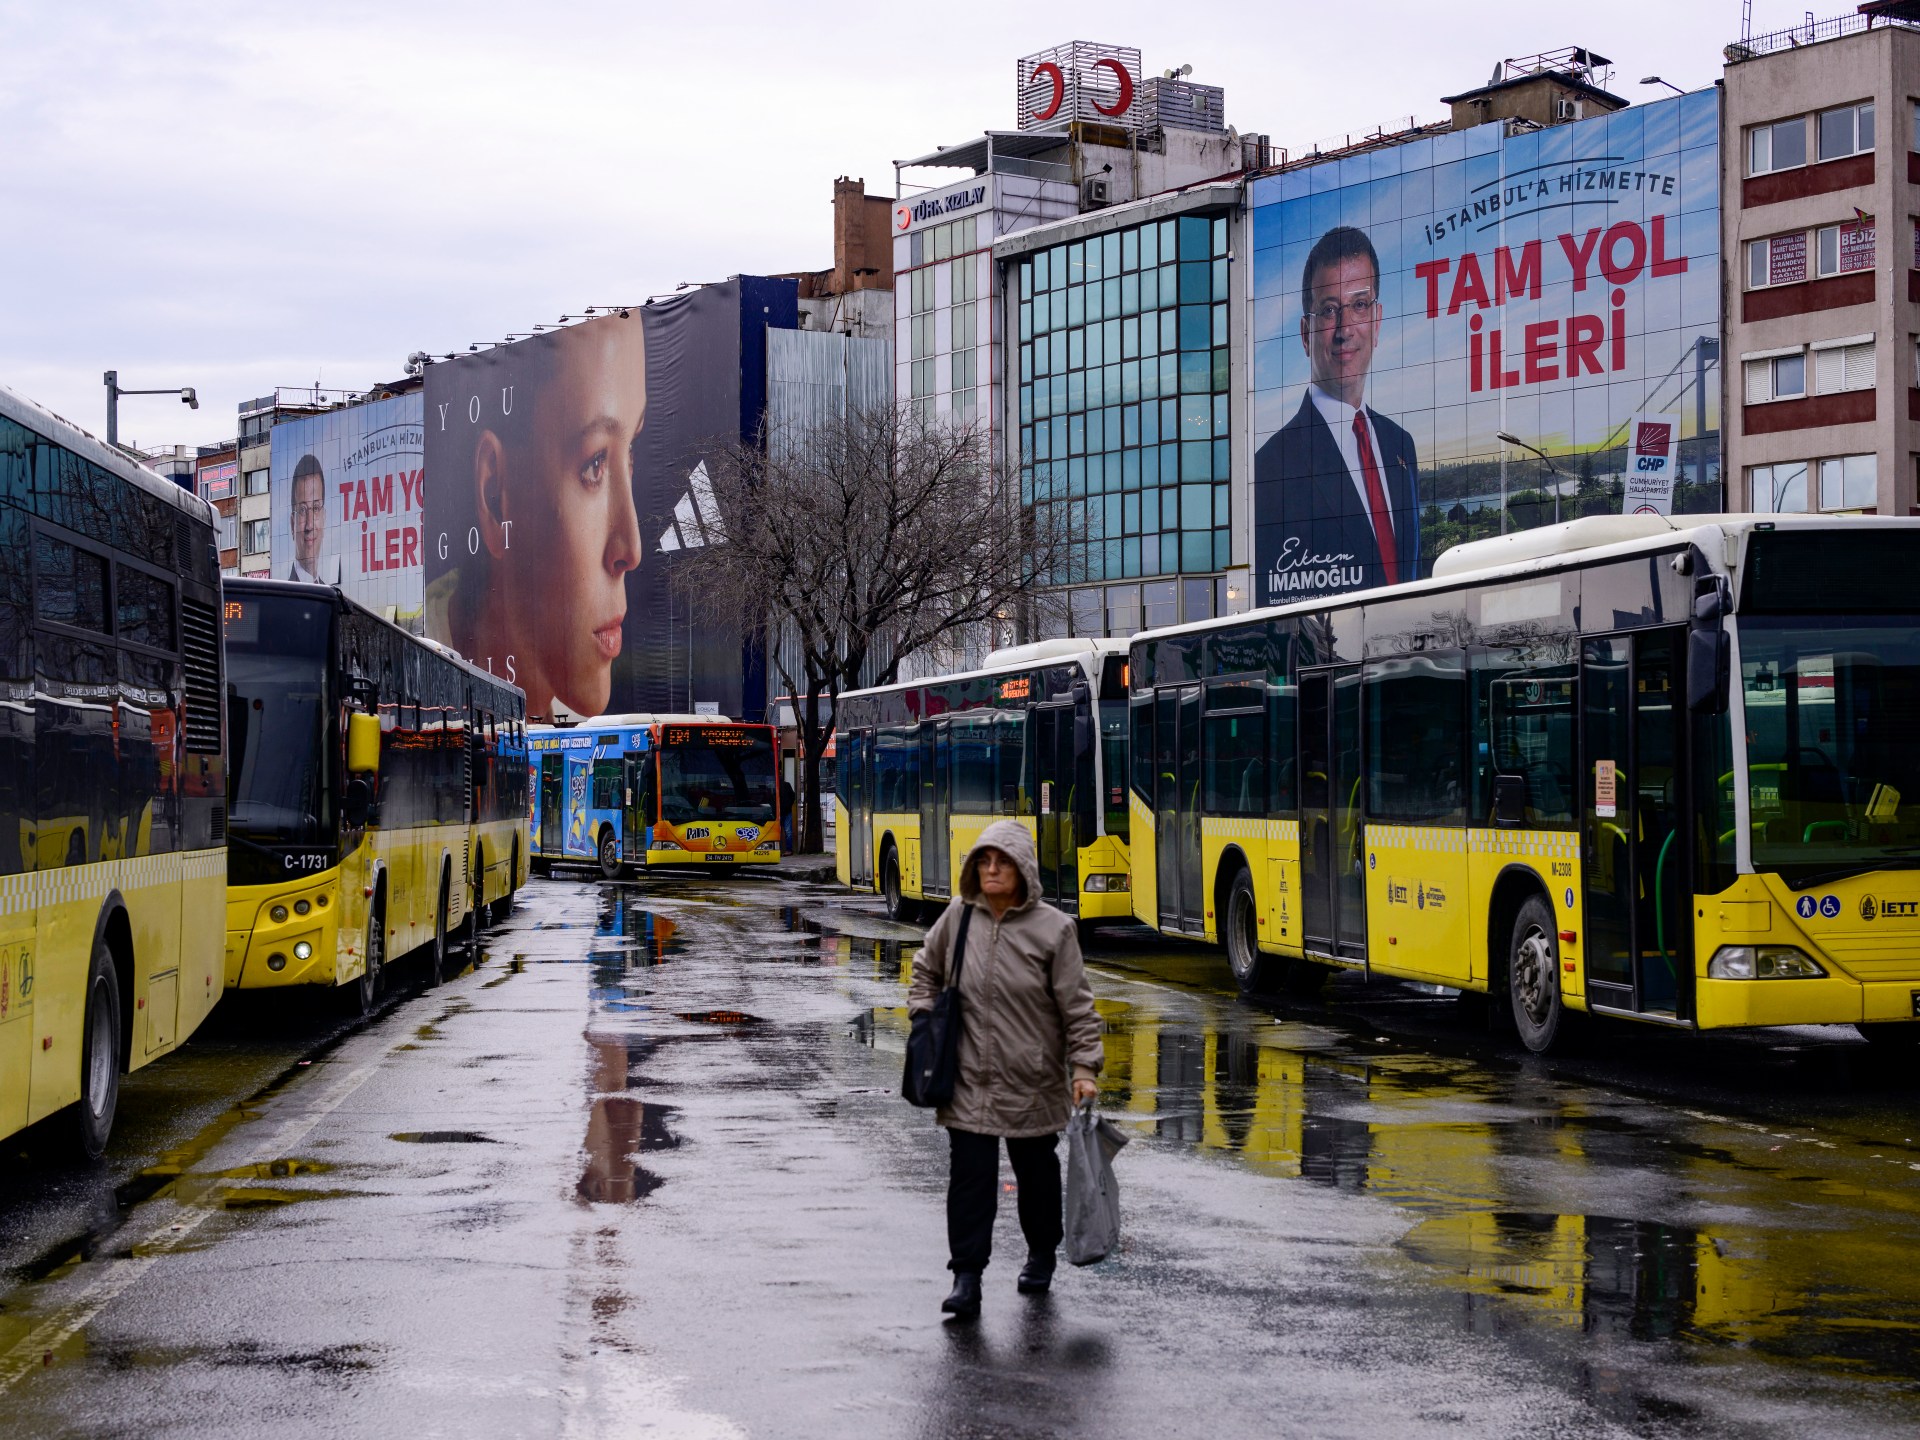 Fears of AI disinformation cast shadow over Turkish local elections | Elections News [Video]